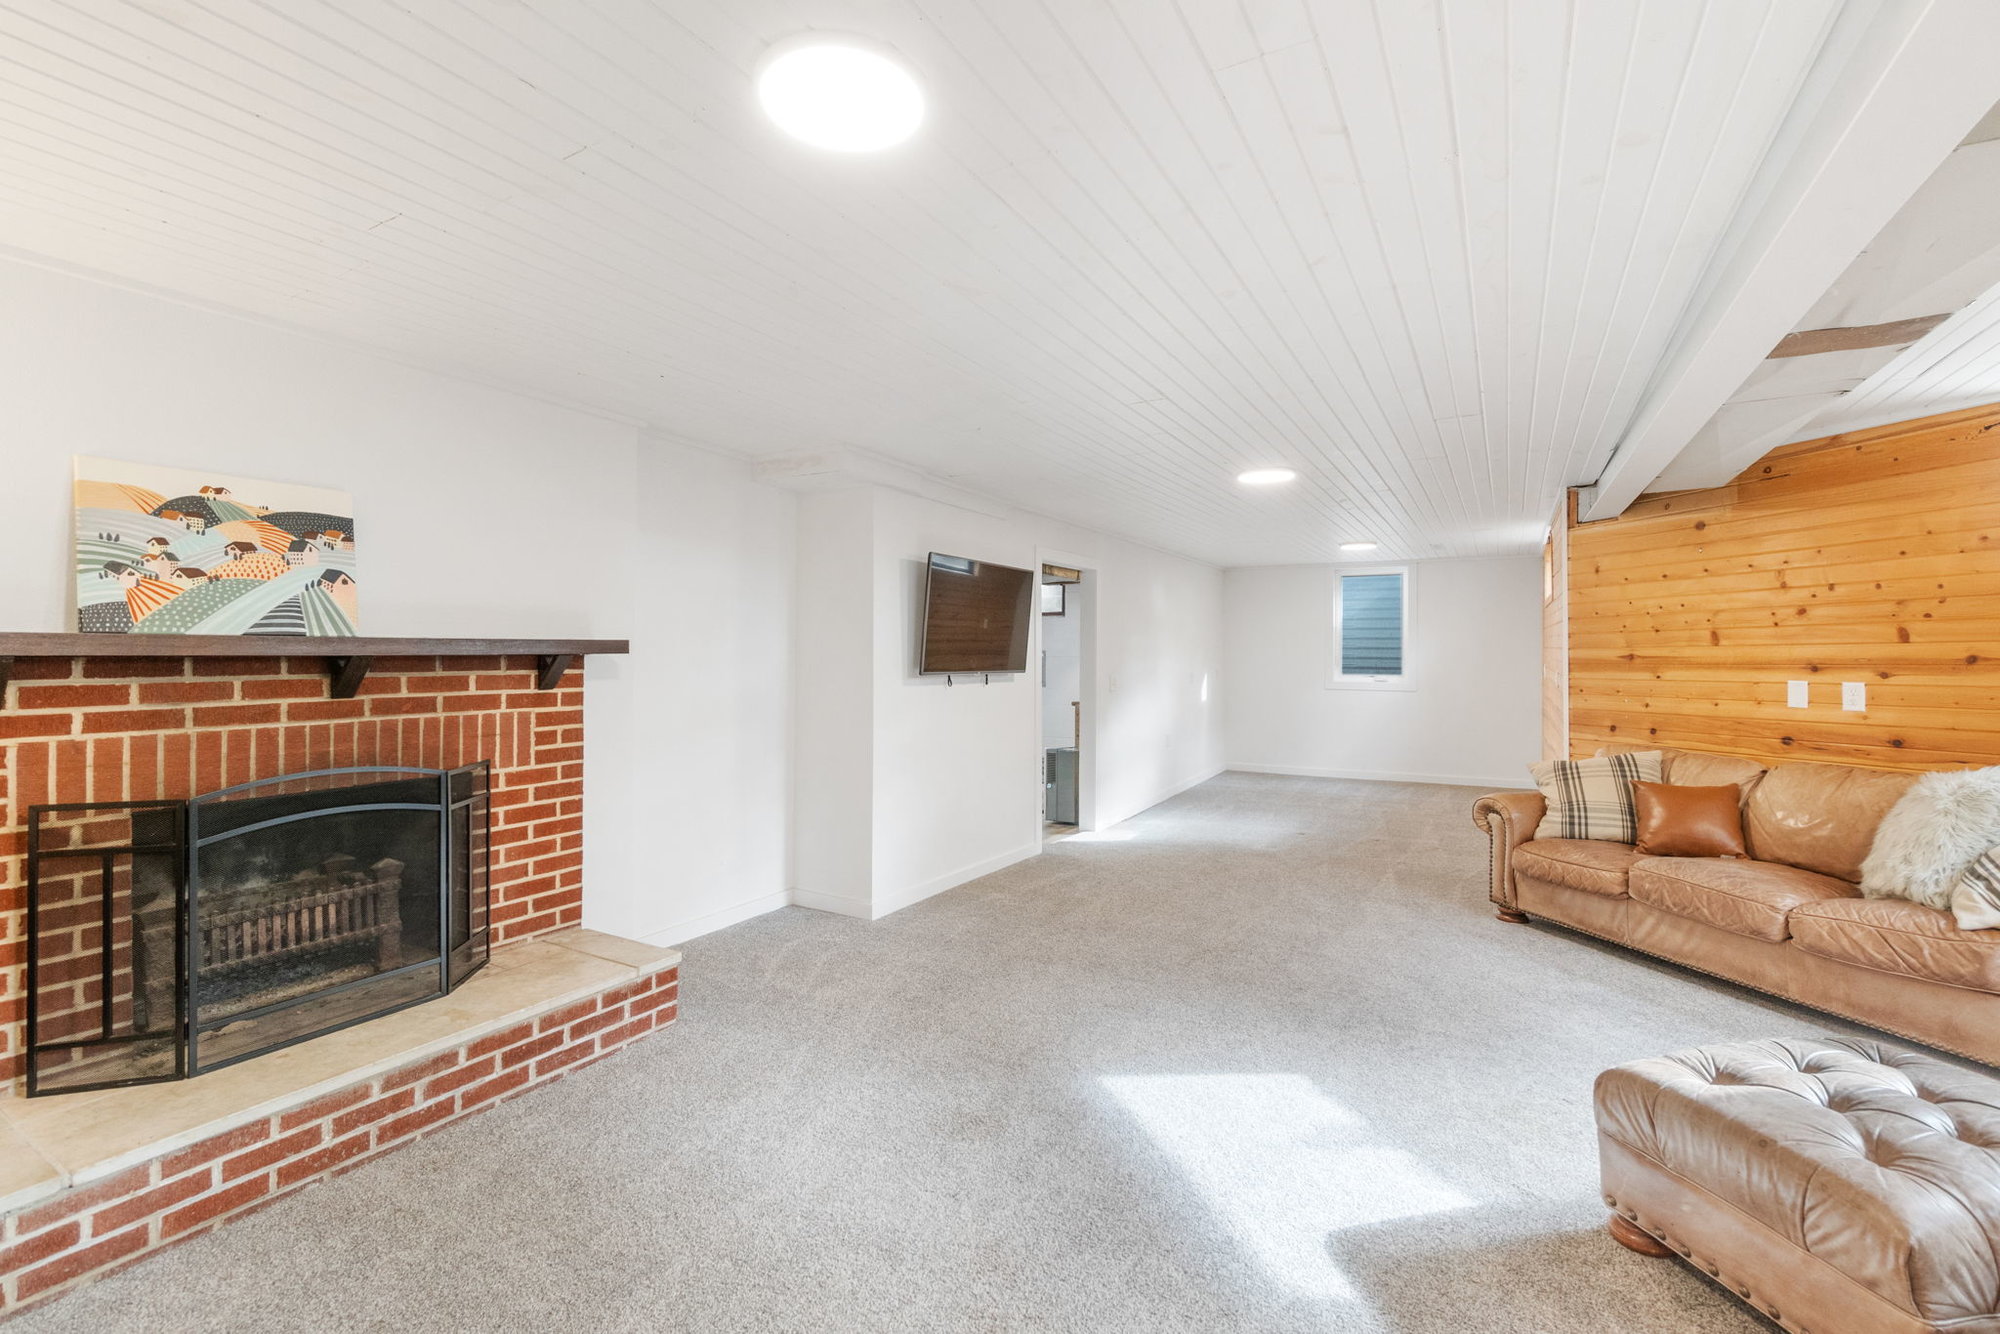 This Stunning Mid-Century Modern Home is the Perfect Blend of Retro Style and Modern Conveniences - 912 W 16th St., Cedar Falls